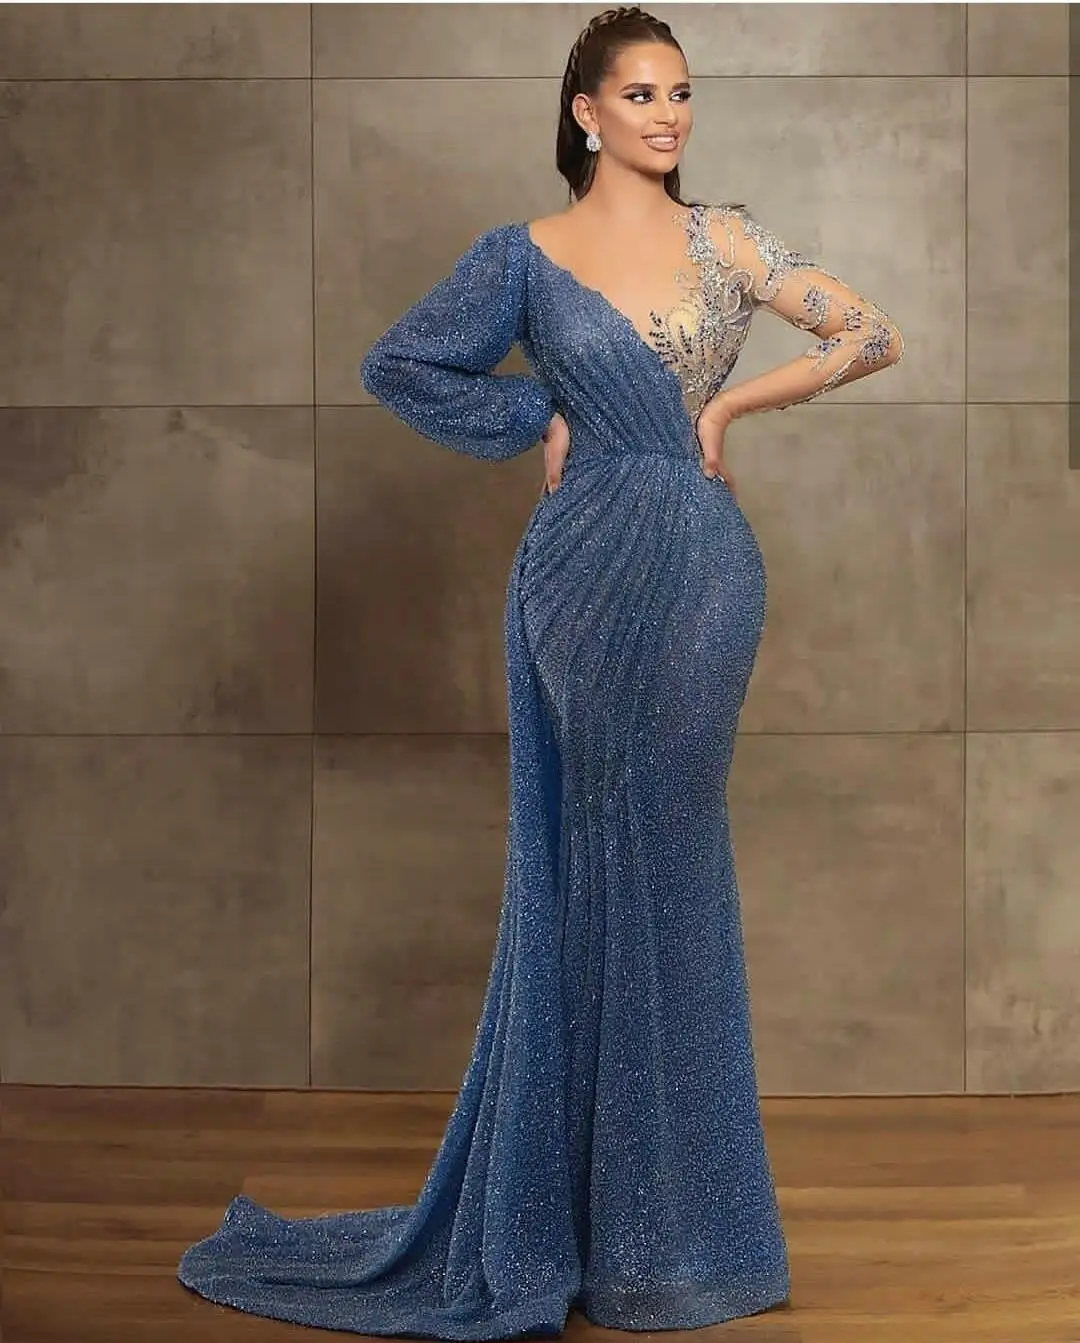 

2021 New Blue Evening Dresses Jewel Neck Beaded Sequined Lace Long Sleeve Mermaid Prom Dress Sweep Train Custom Illusion Robes